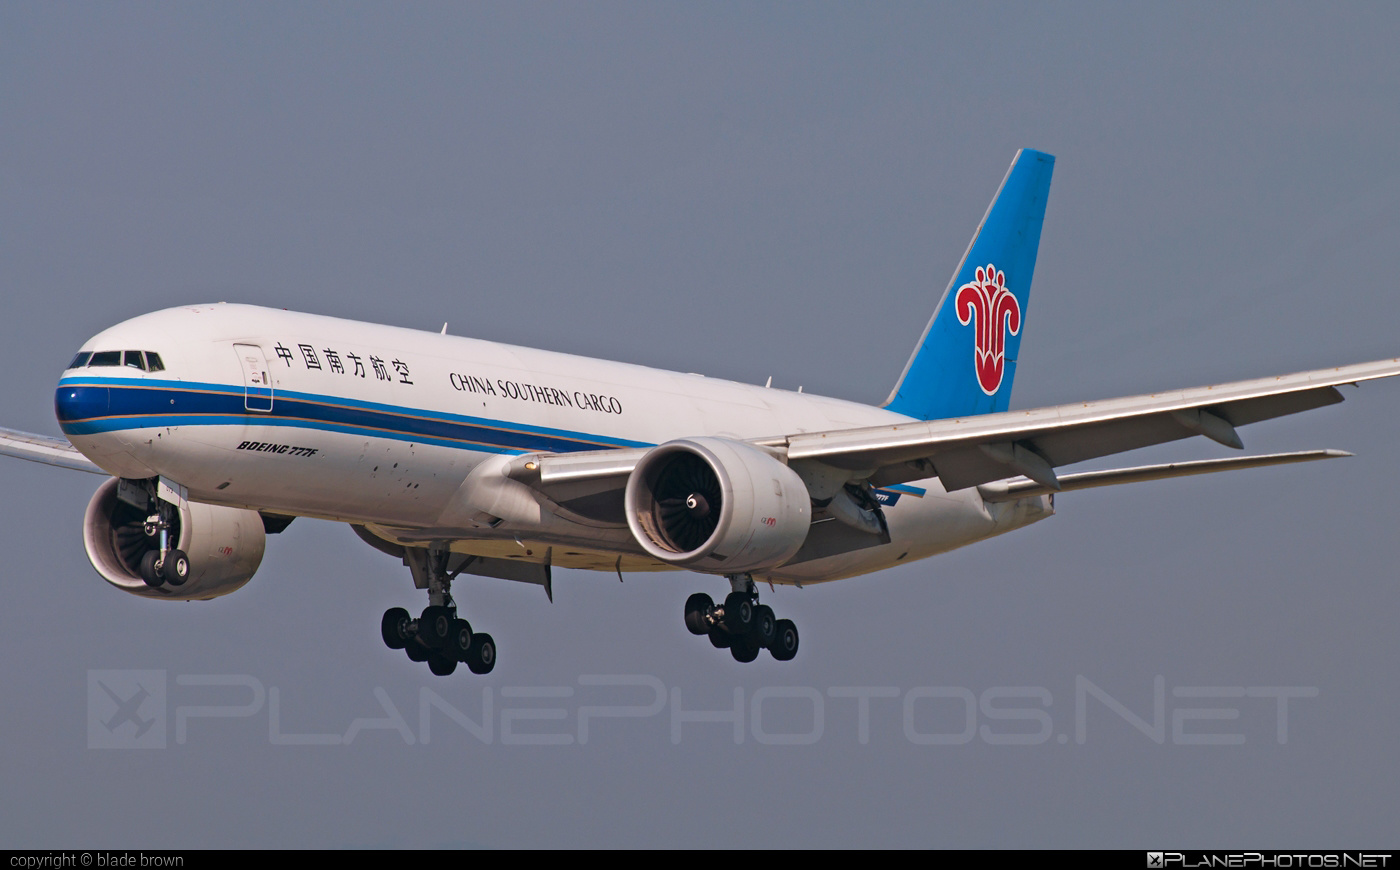 Boeing 777F - B-2073 operated by China Southern Cargo #b777 #b777f #b777freighter #boeing #boeing777 #tripleseven